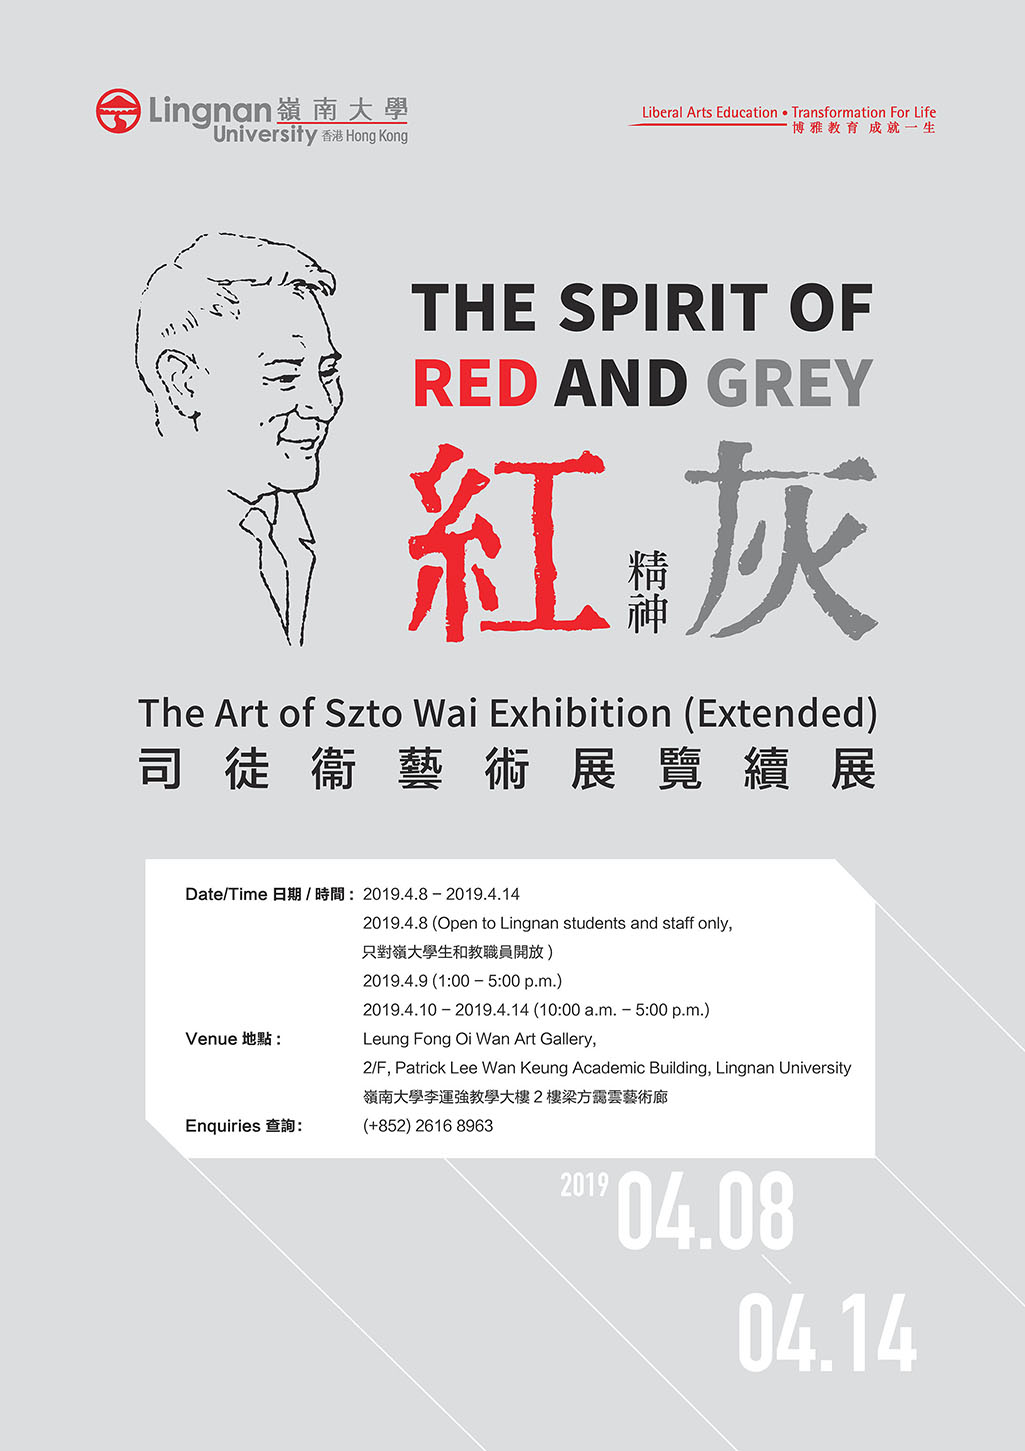 The Art of Szto Wai Exhibition at LU